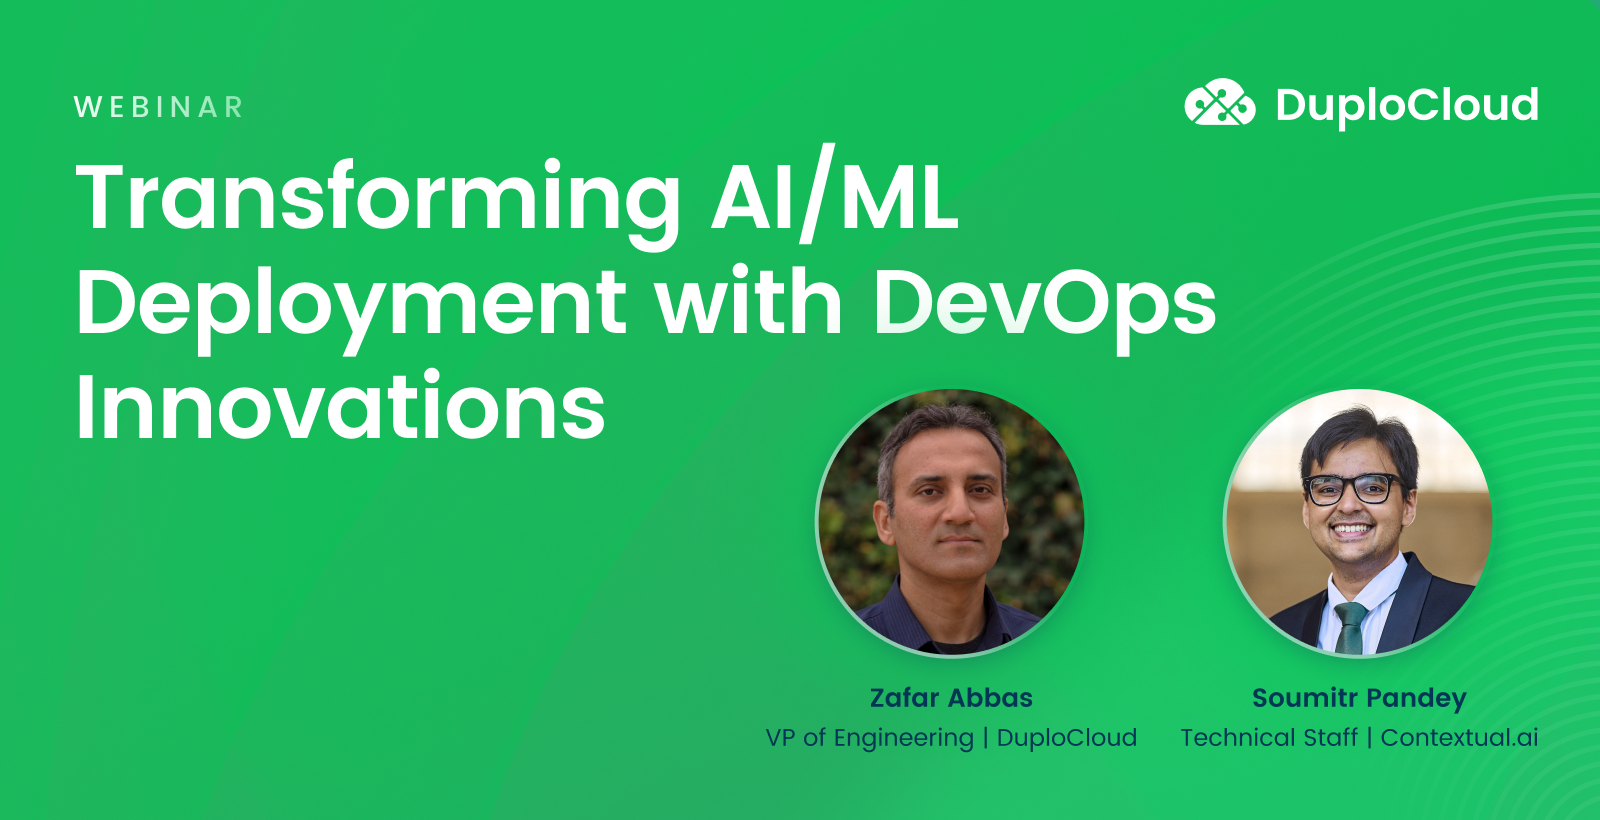 Accelerate AI/ML Workloads with DuploCloud